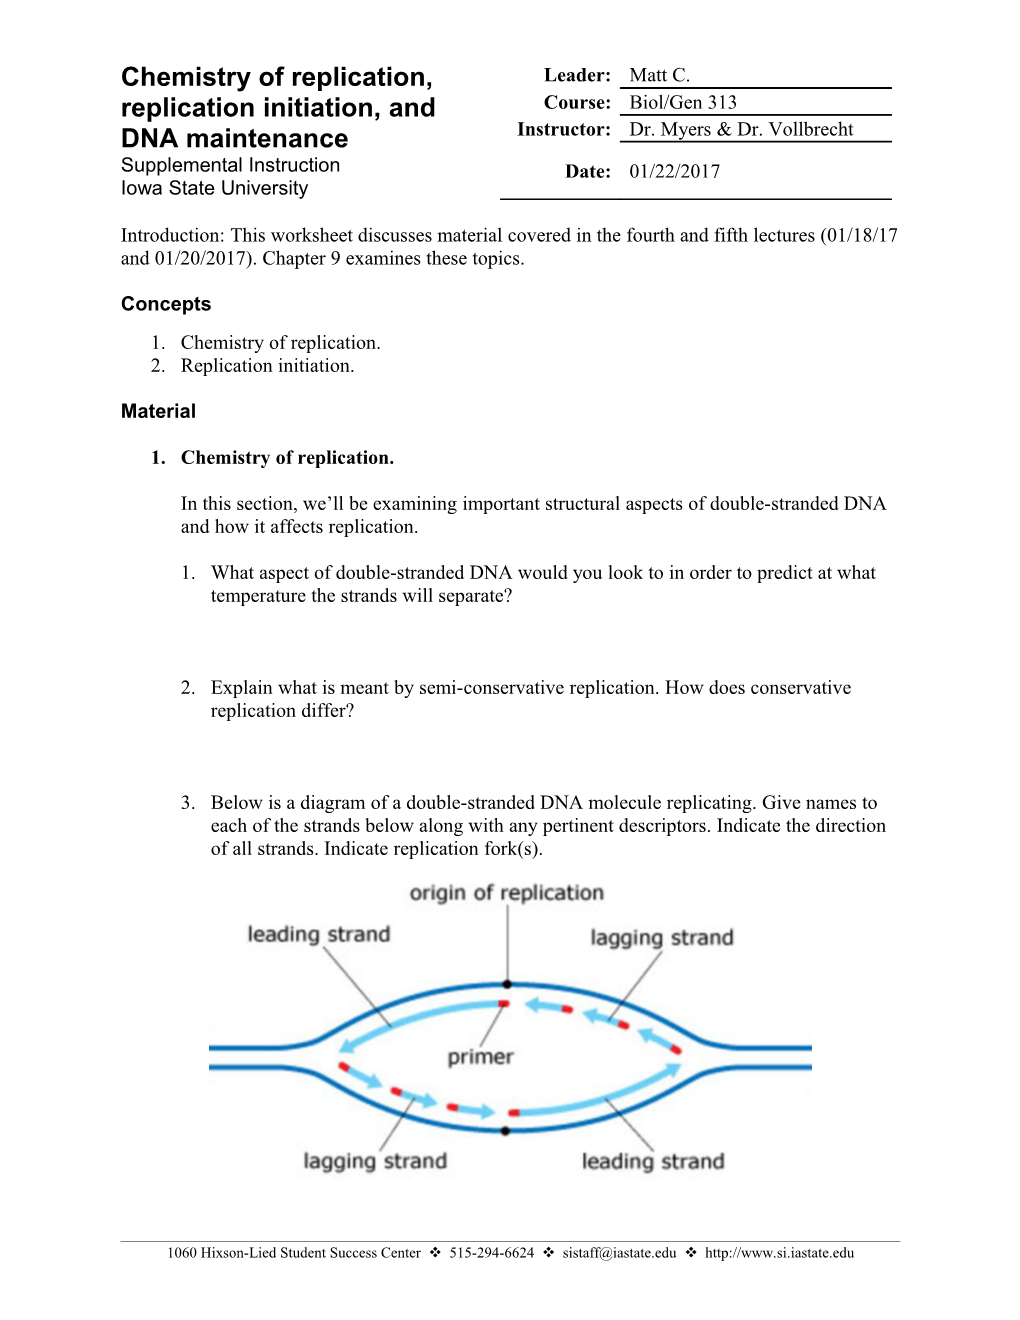 Introduction: This Worksheet Discusses Material Covered in the Fourth and Fifth Lectures